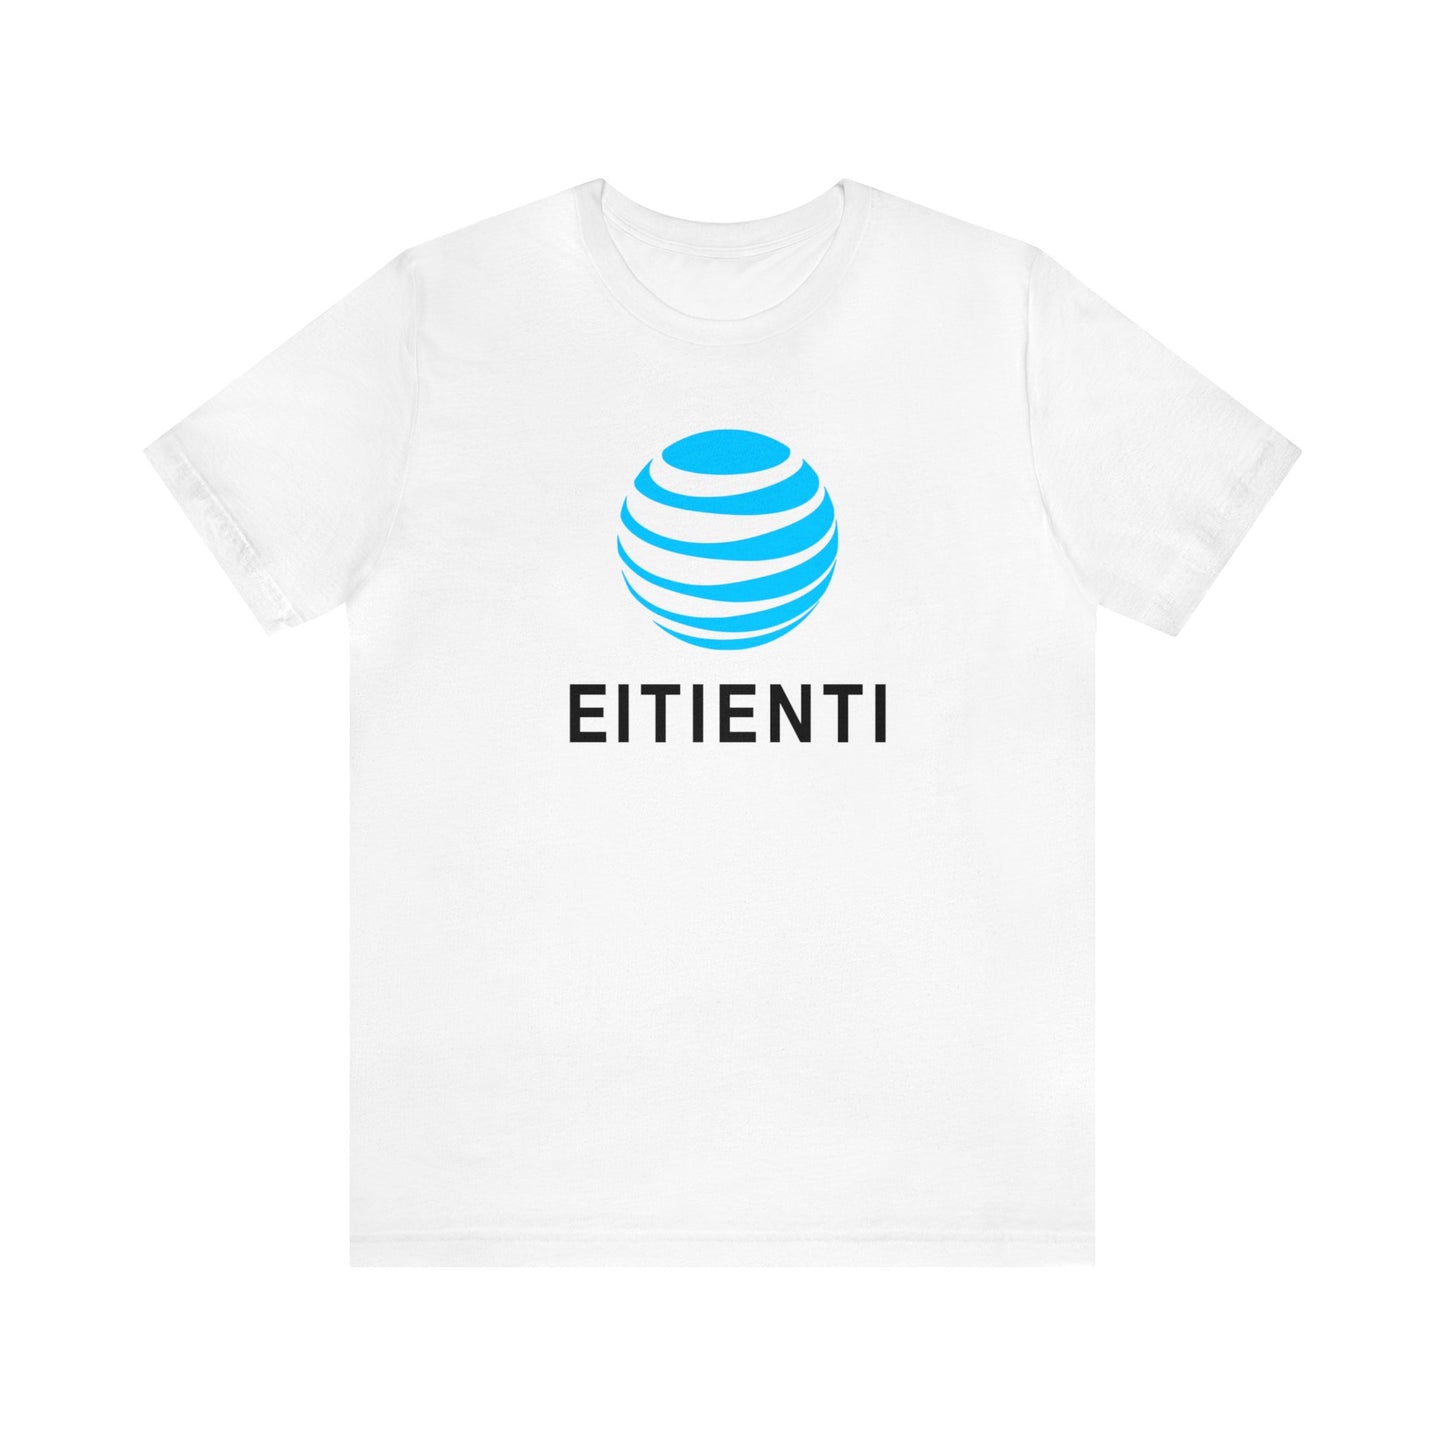 Eitienti T-Shirt - Funny Hilarious AT&T Logo Parody